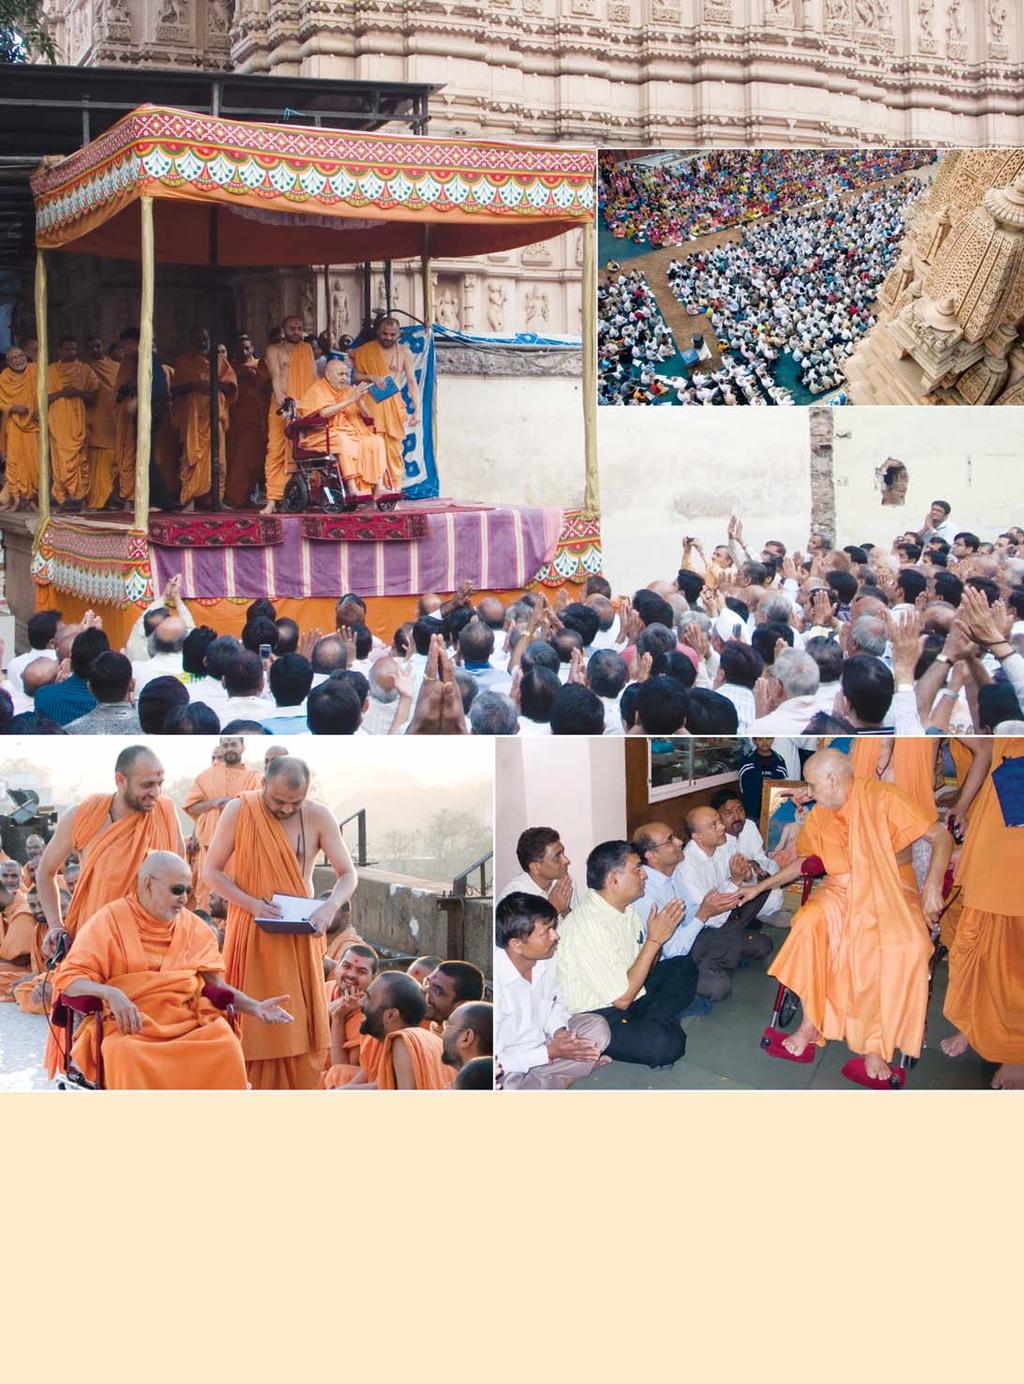 1 SWAMISHRI IN MUMBAI January 2008 1. Swamishri blesses the devotees who have come to the mandir for morning darshan. Inset: View from above of devotees seated on the mandir grounds. 2. During his morning rounds on the mandir terrace Swamishri shares light moments with the sadhus.